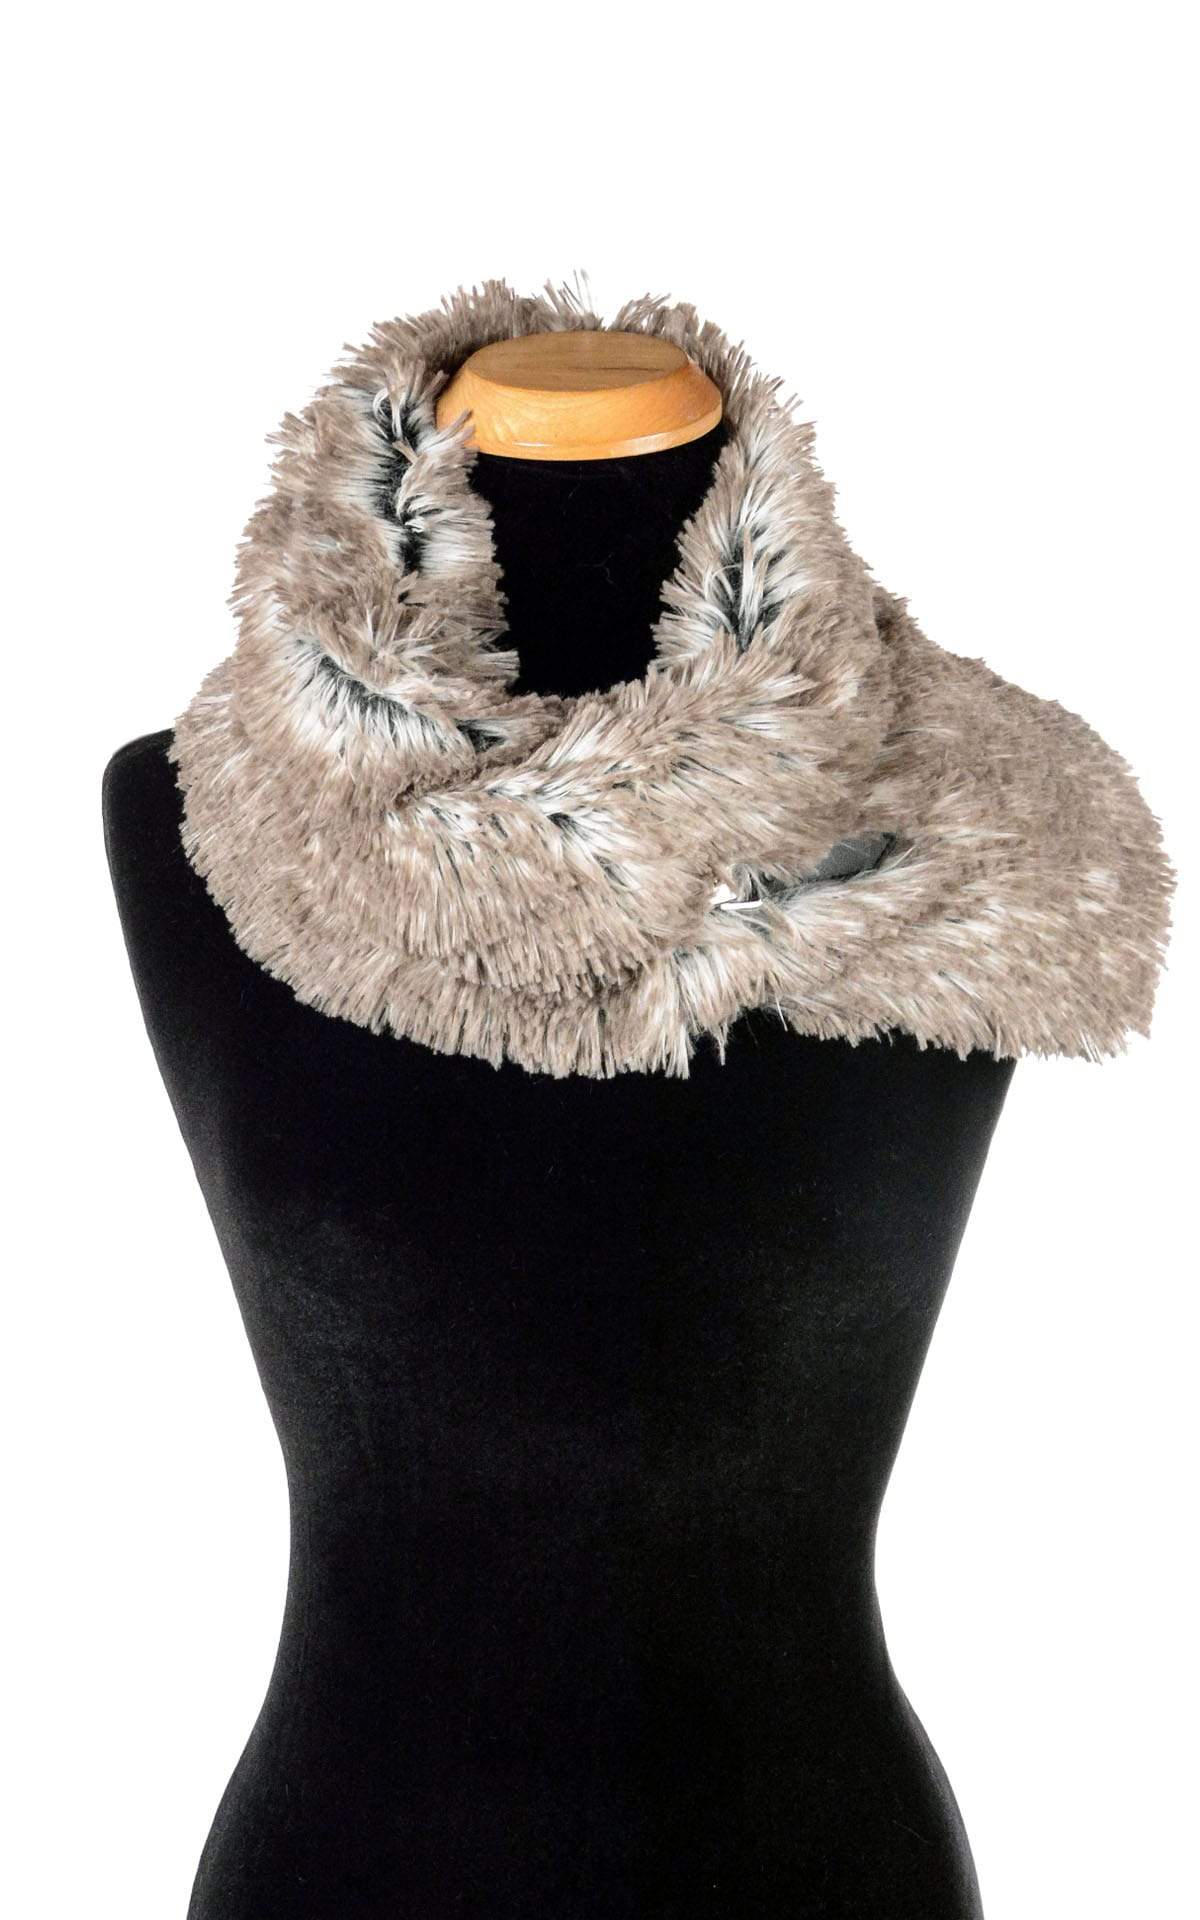 Buckle Scarf in Arctic Fox Faux Fur, shown buckled and worn with buckle on right side.